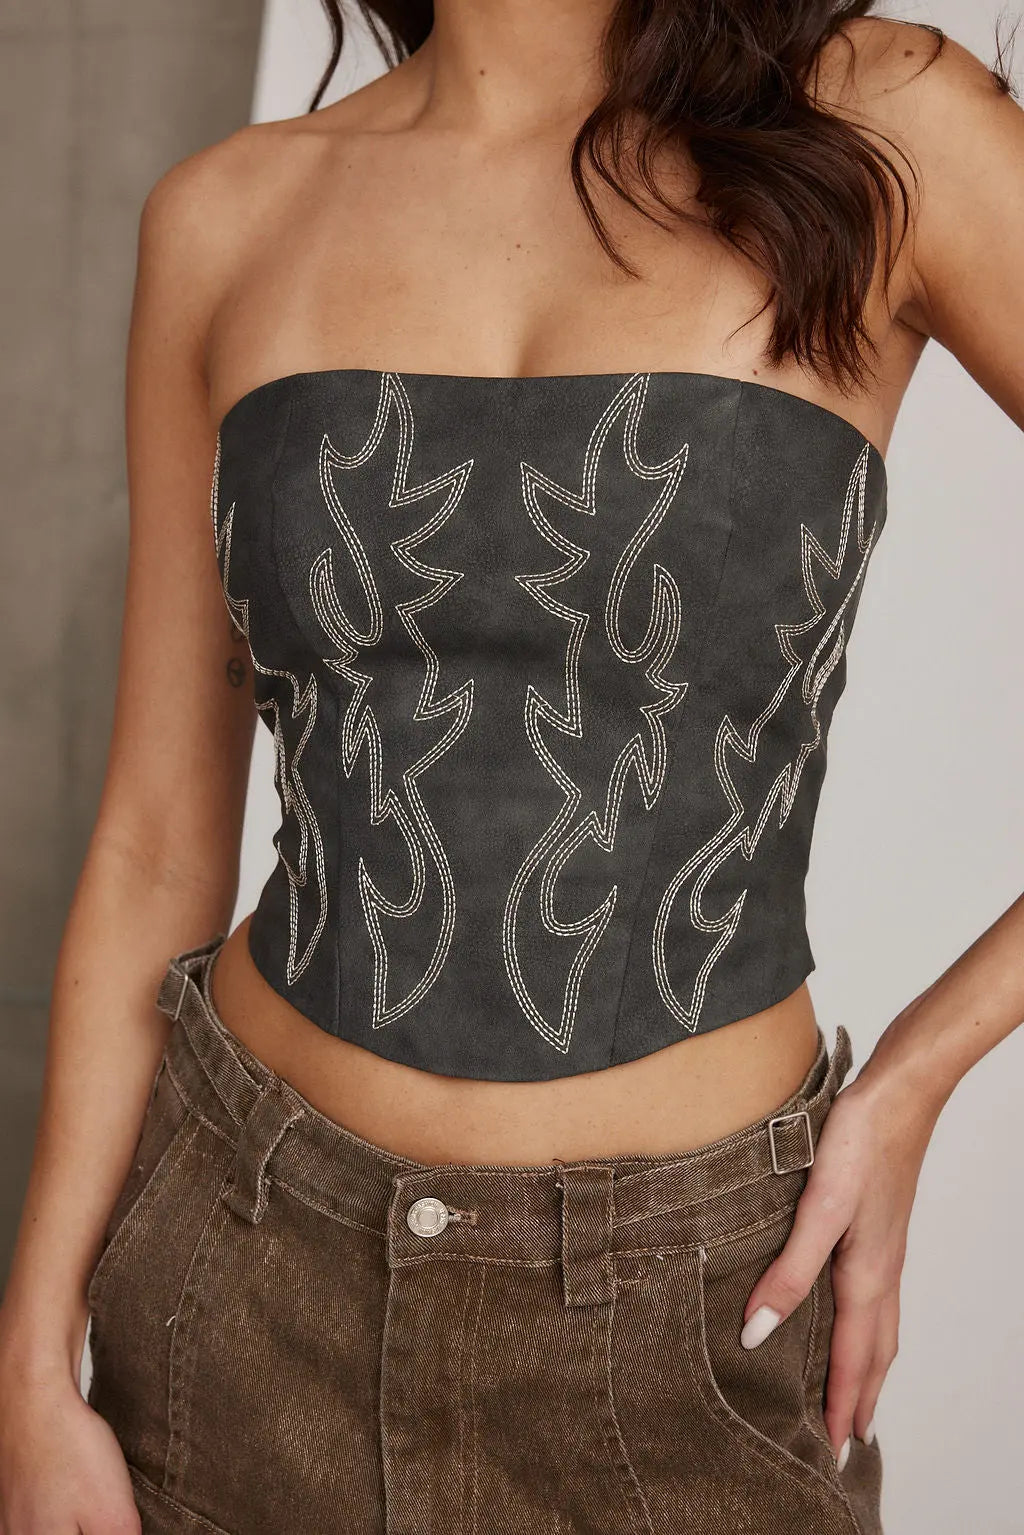 SMALL TOWN SMOKE SHOW FAUX LEATHER CORSET TOP-BLACK